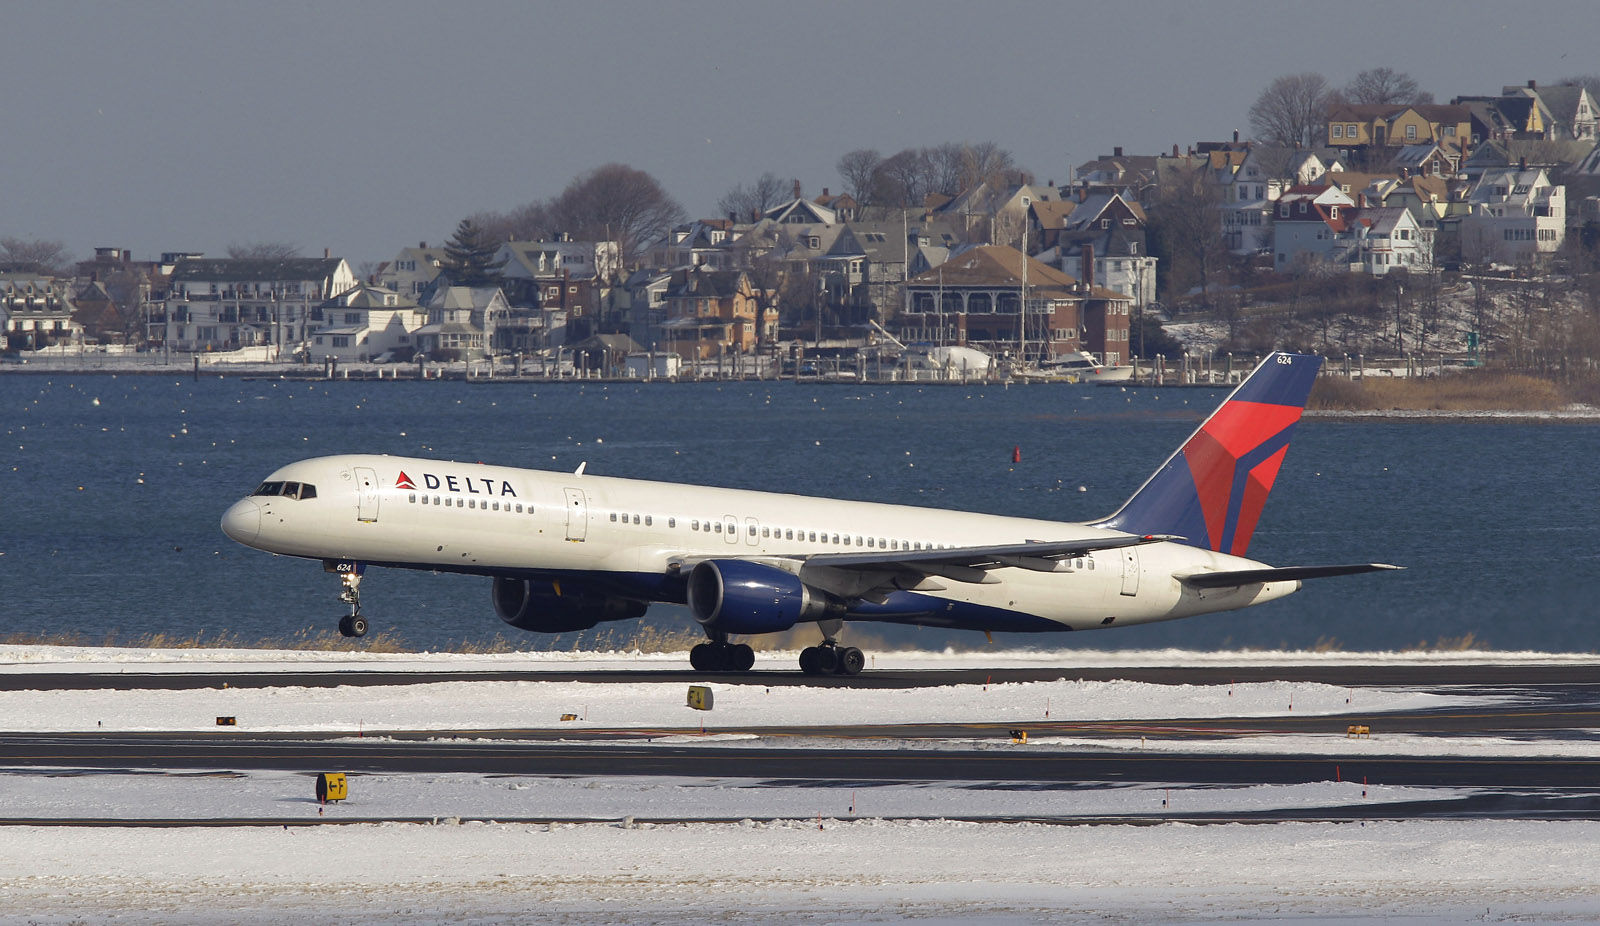 Delta Airlines was ranked the number one airline in 2017 according The Wall Street Journal's Middle Seat scorecard. The airline ranked number one overall and in on-time arrivals. File. (AP Photo/Stephan Savoia)